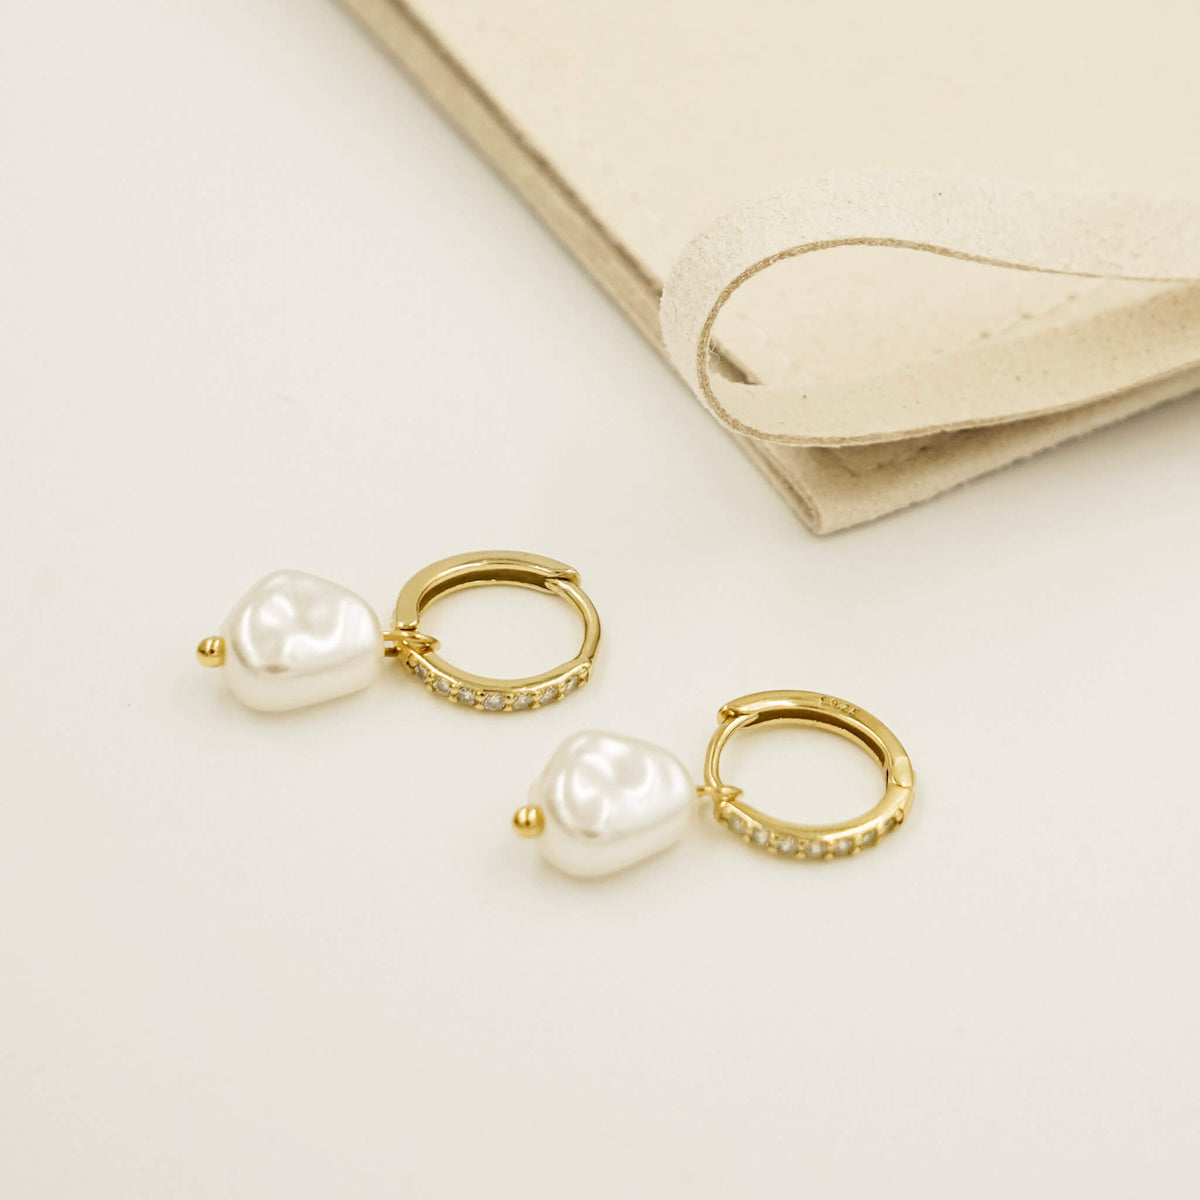 Pearl earrings with a detachable pearl charm. The charm hangs on a gold embellished huggy band.